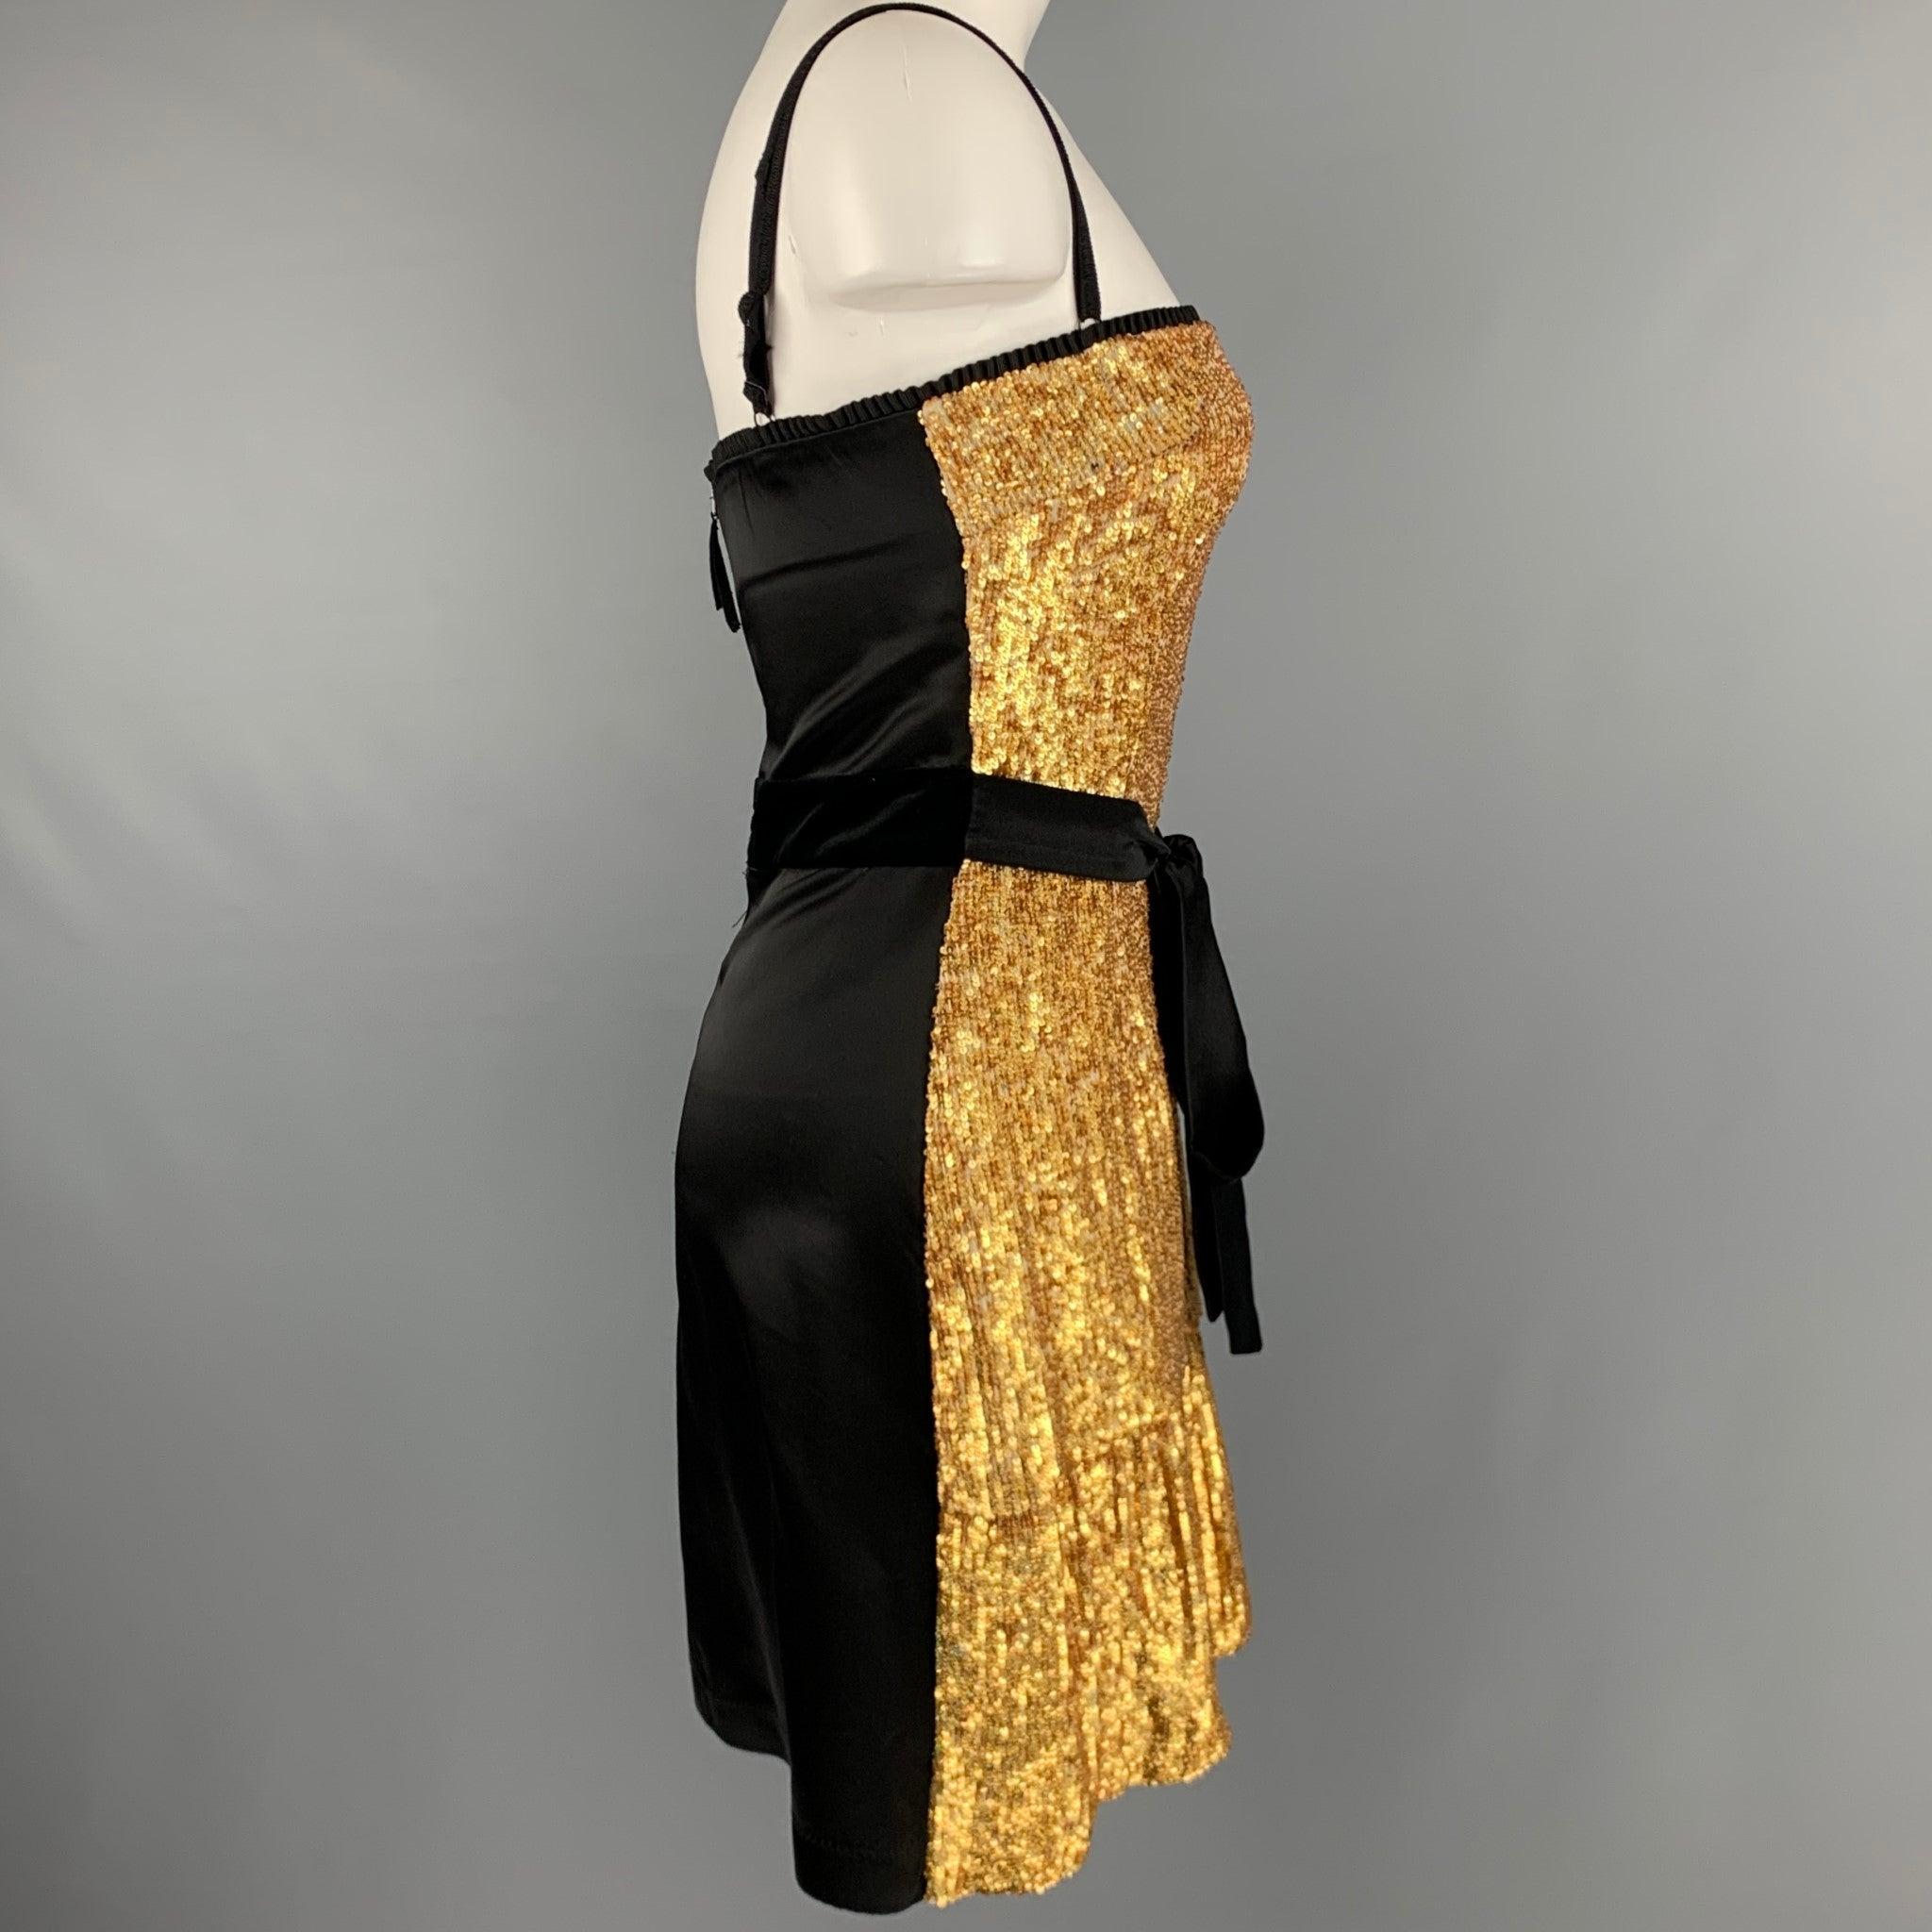 D&G by DOLCE & GABBANA cocktail dress
in a black polyester blend fabric featuring gold tone sequined front, black satin tie belt, spaghetti straps, and a back zipper closure.Very Good Pre-Owned Condition with Tags. Minor signs of wear. 

Marked:  40